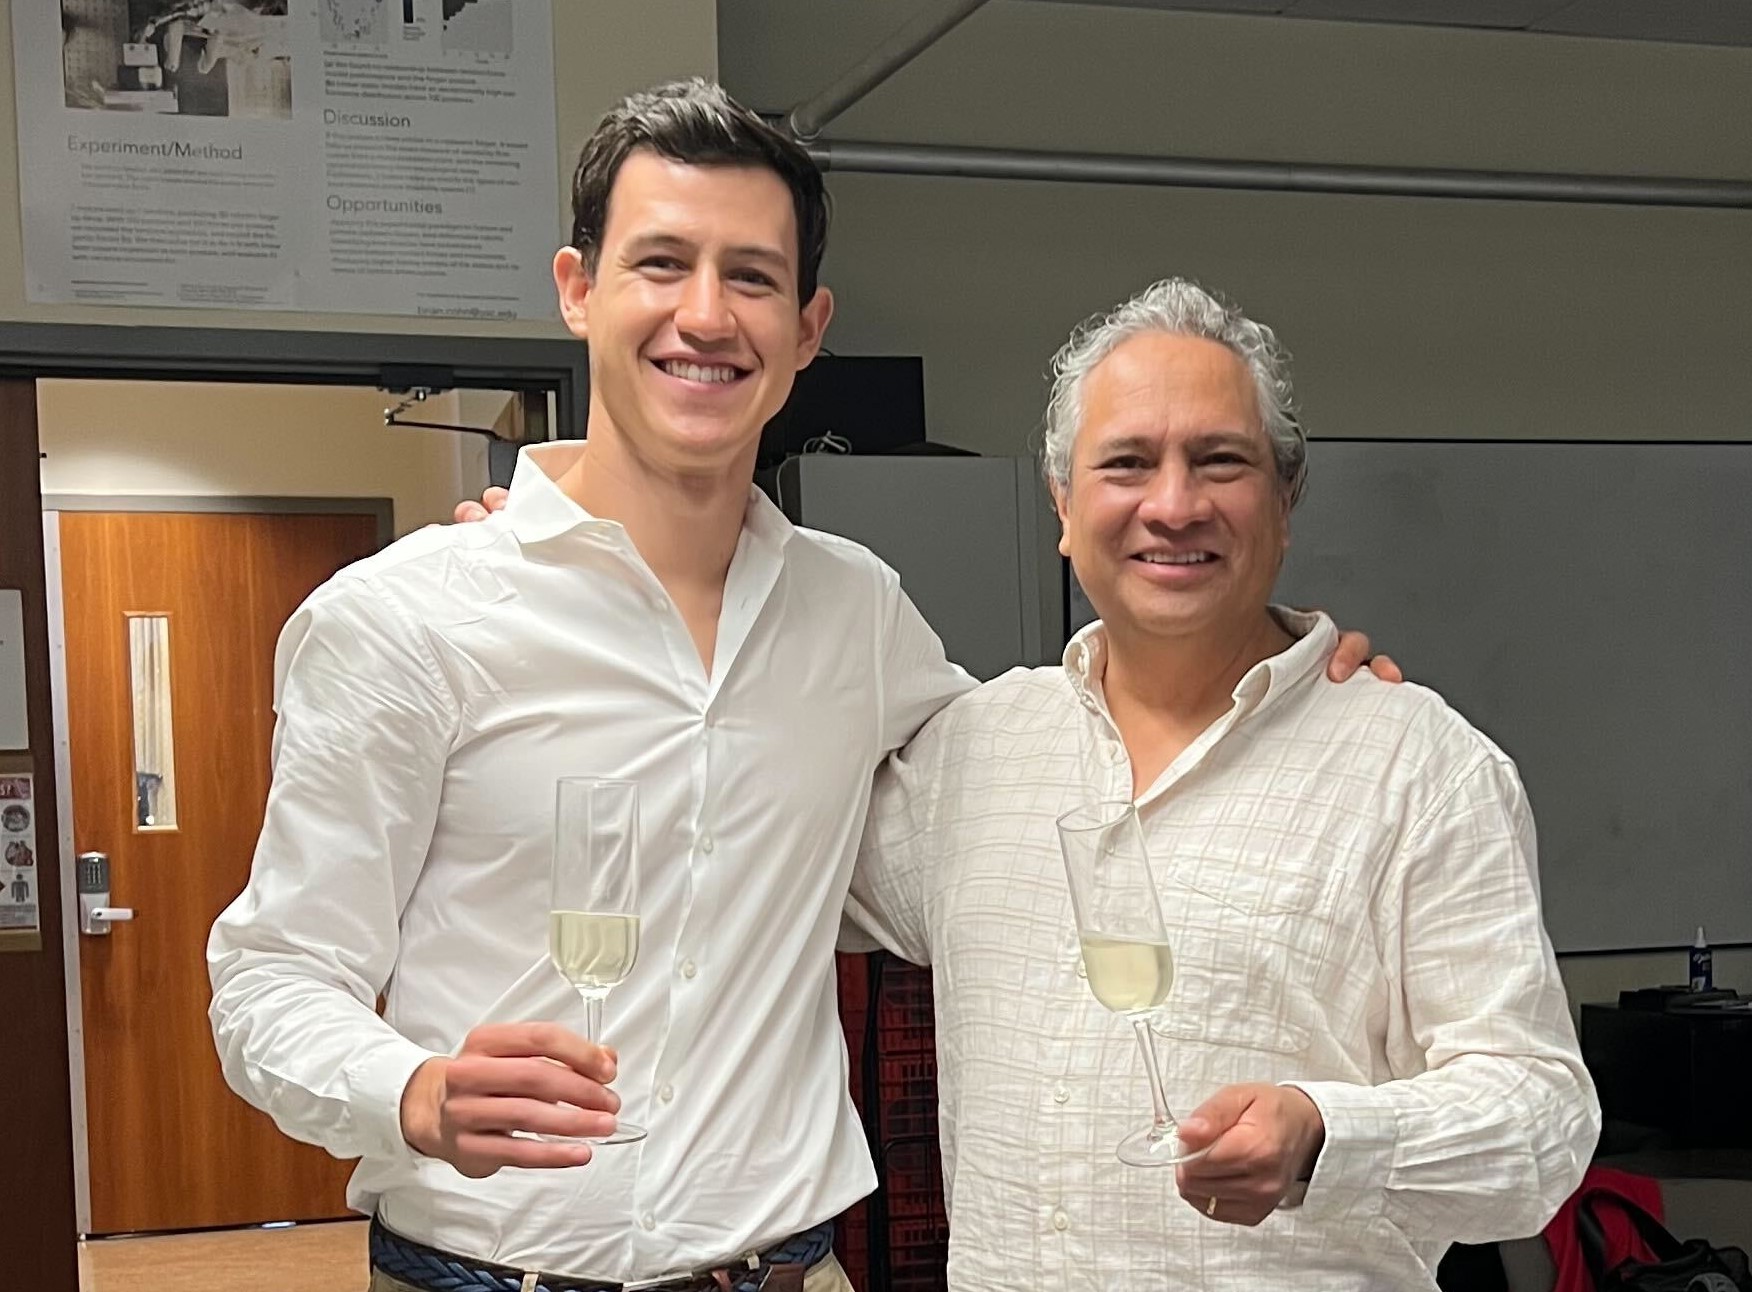 Darío Urbina-Meléndez (left) and Francisco Valero-Cuevas (right) toast with champagne while smiling at the camera.